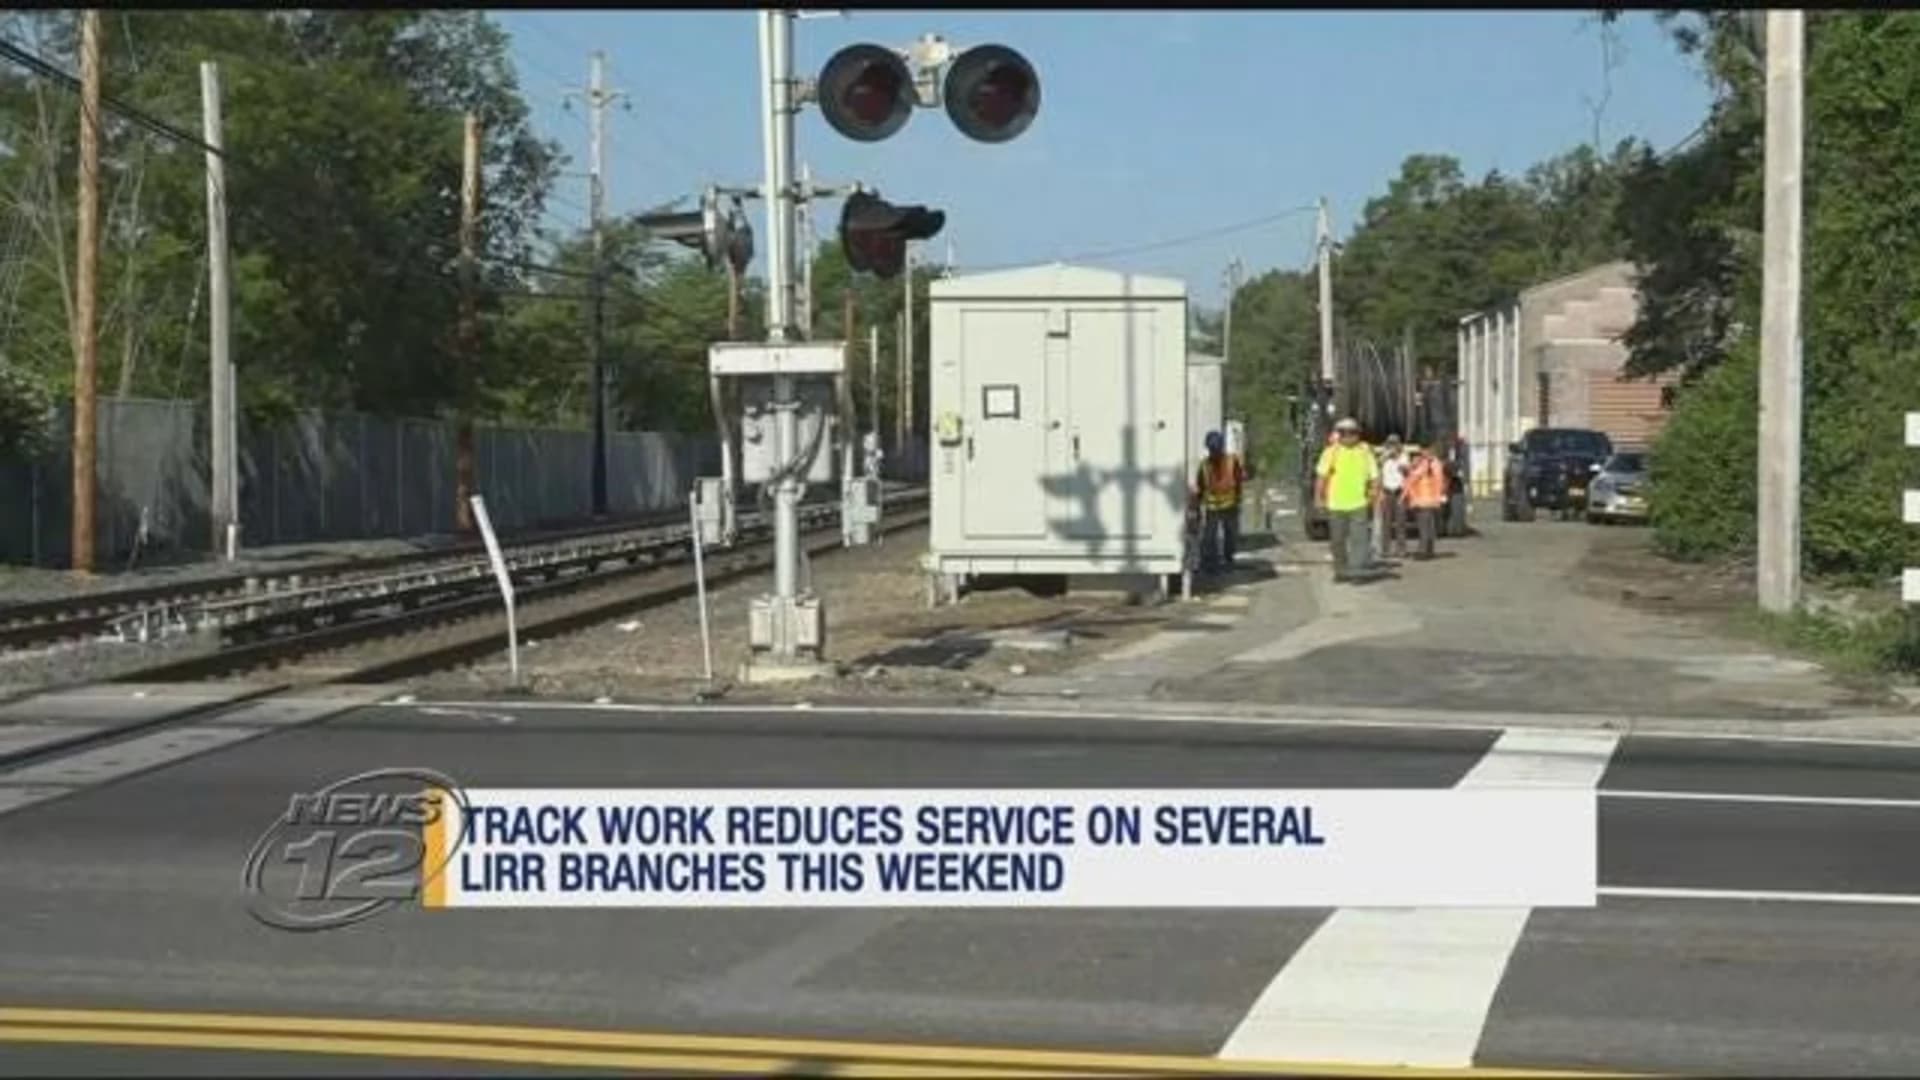 Weekend LIRR work leads to service changes